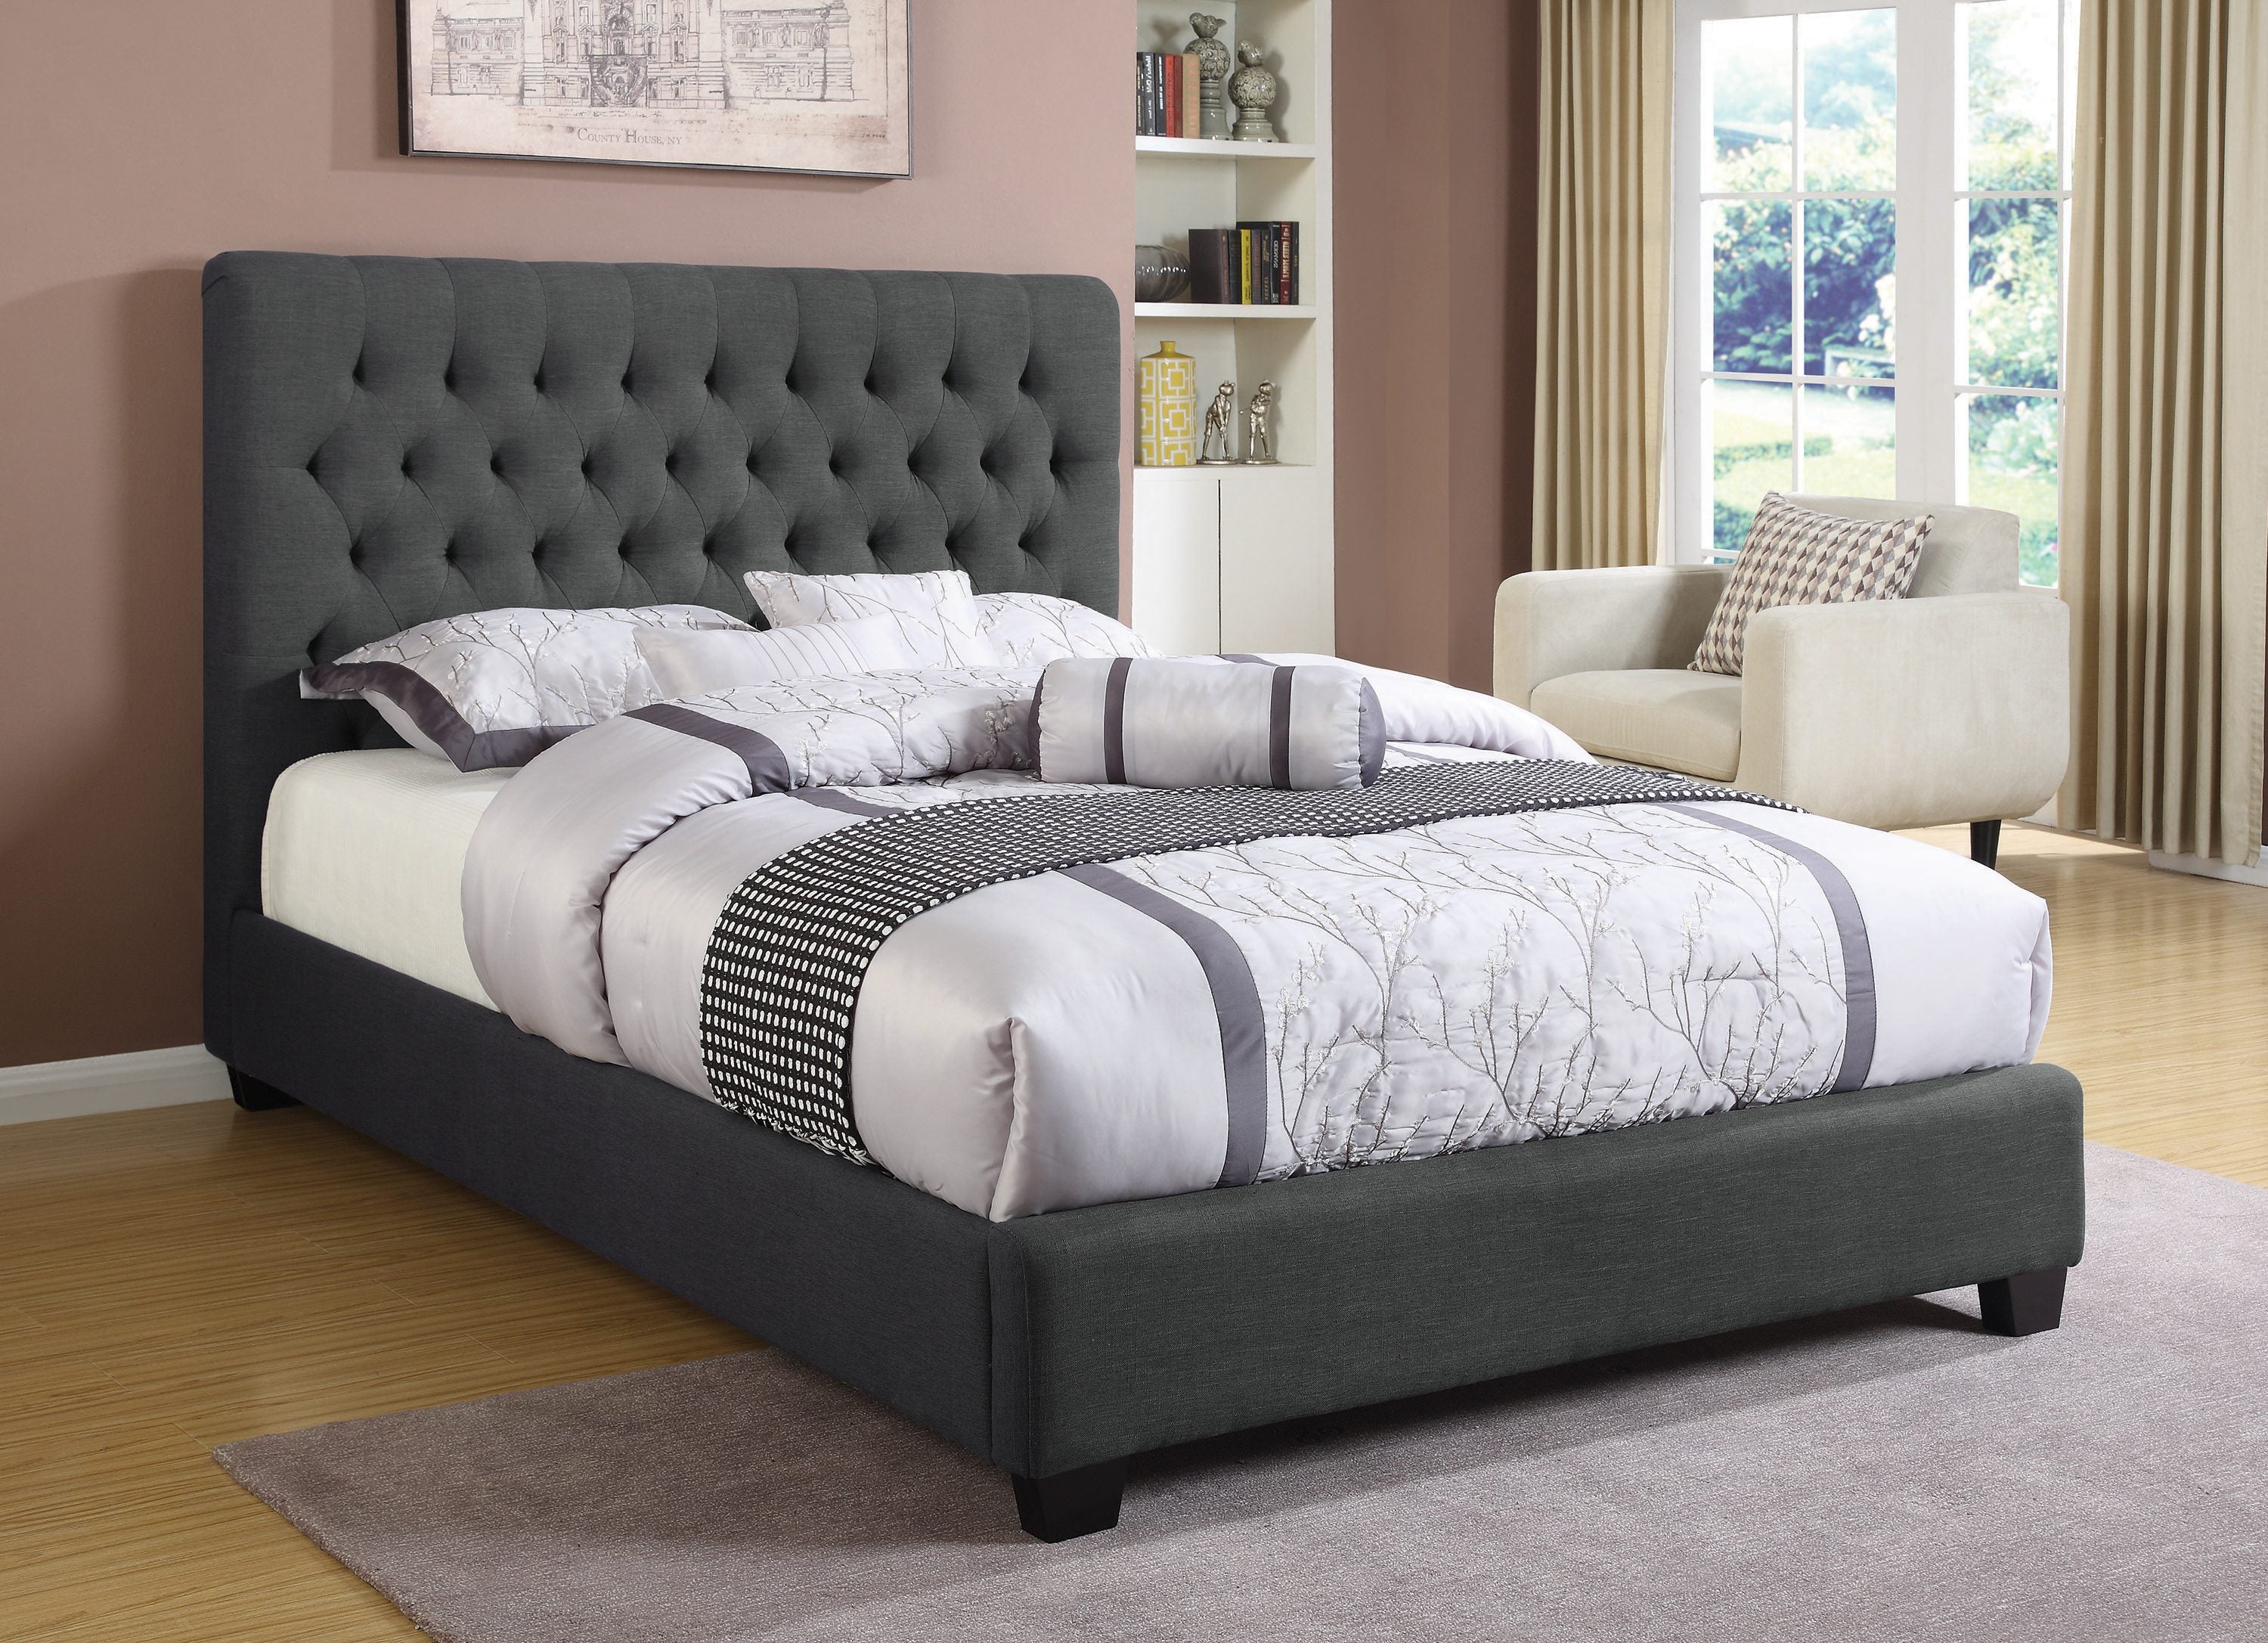 Chloe Tufted Upholstered California King Bed Charcoal